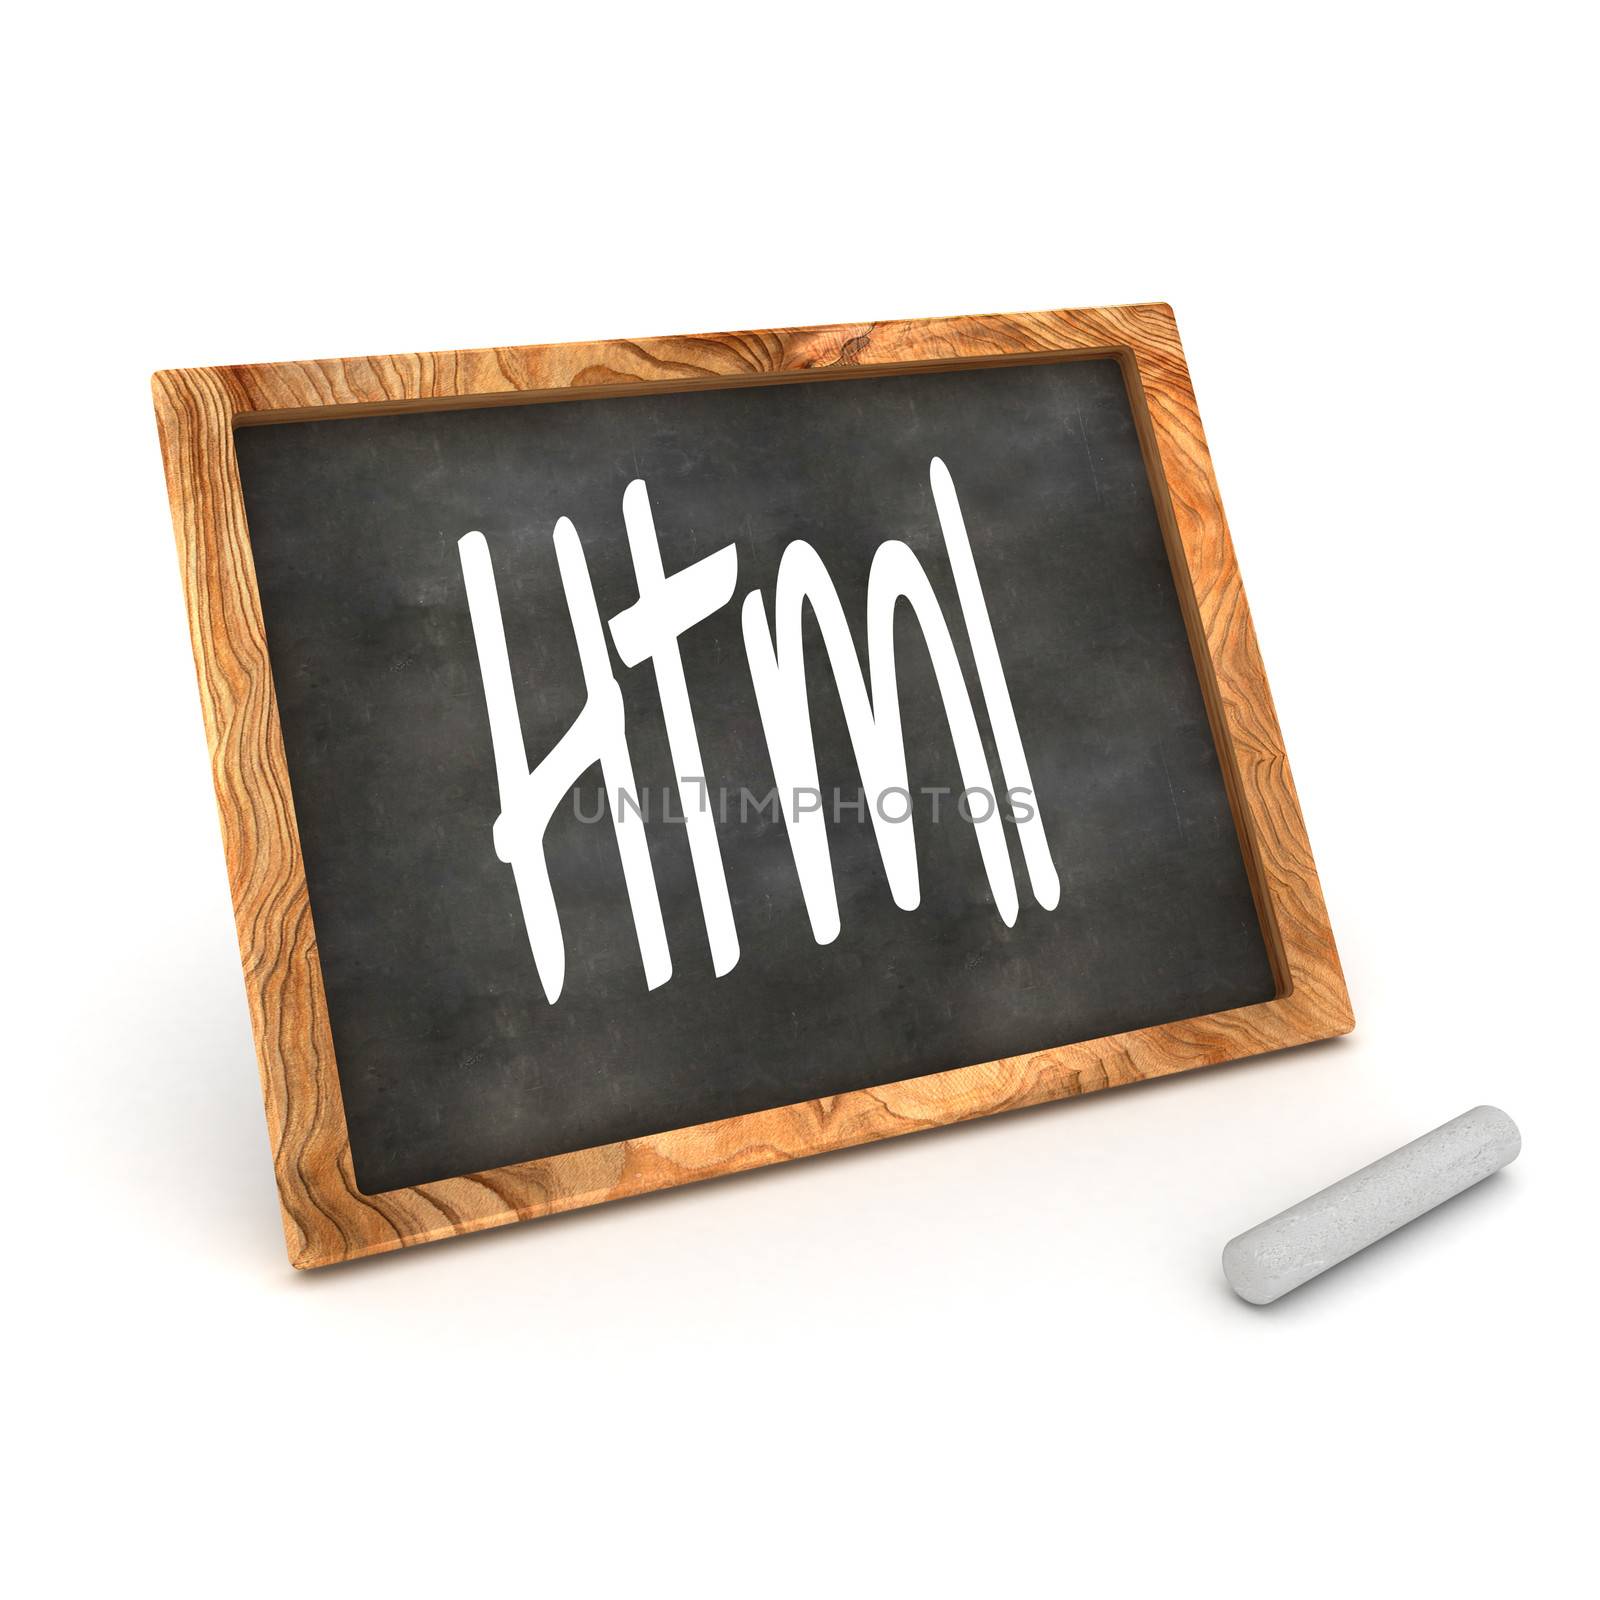 A Colourful 3d Rendered Concept Illustration showing "Html" writen on a Blackboard with white chalk